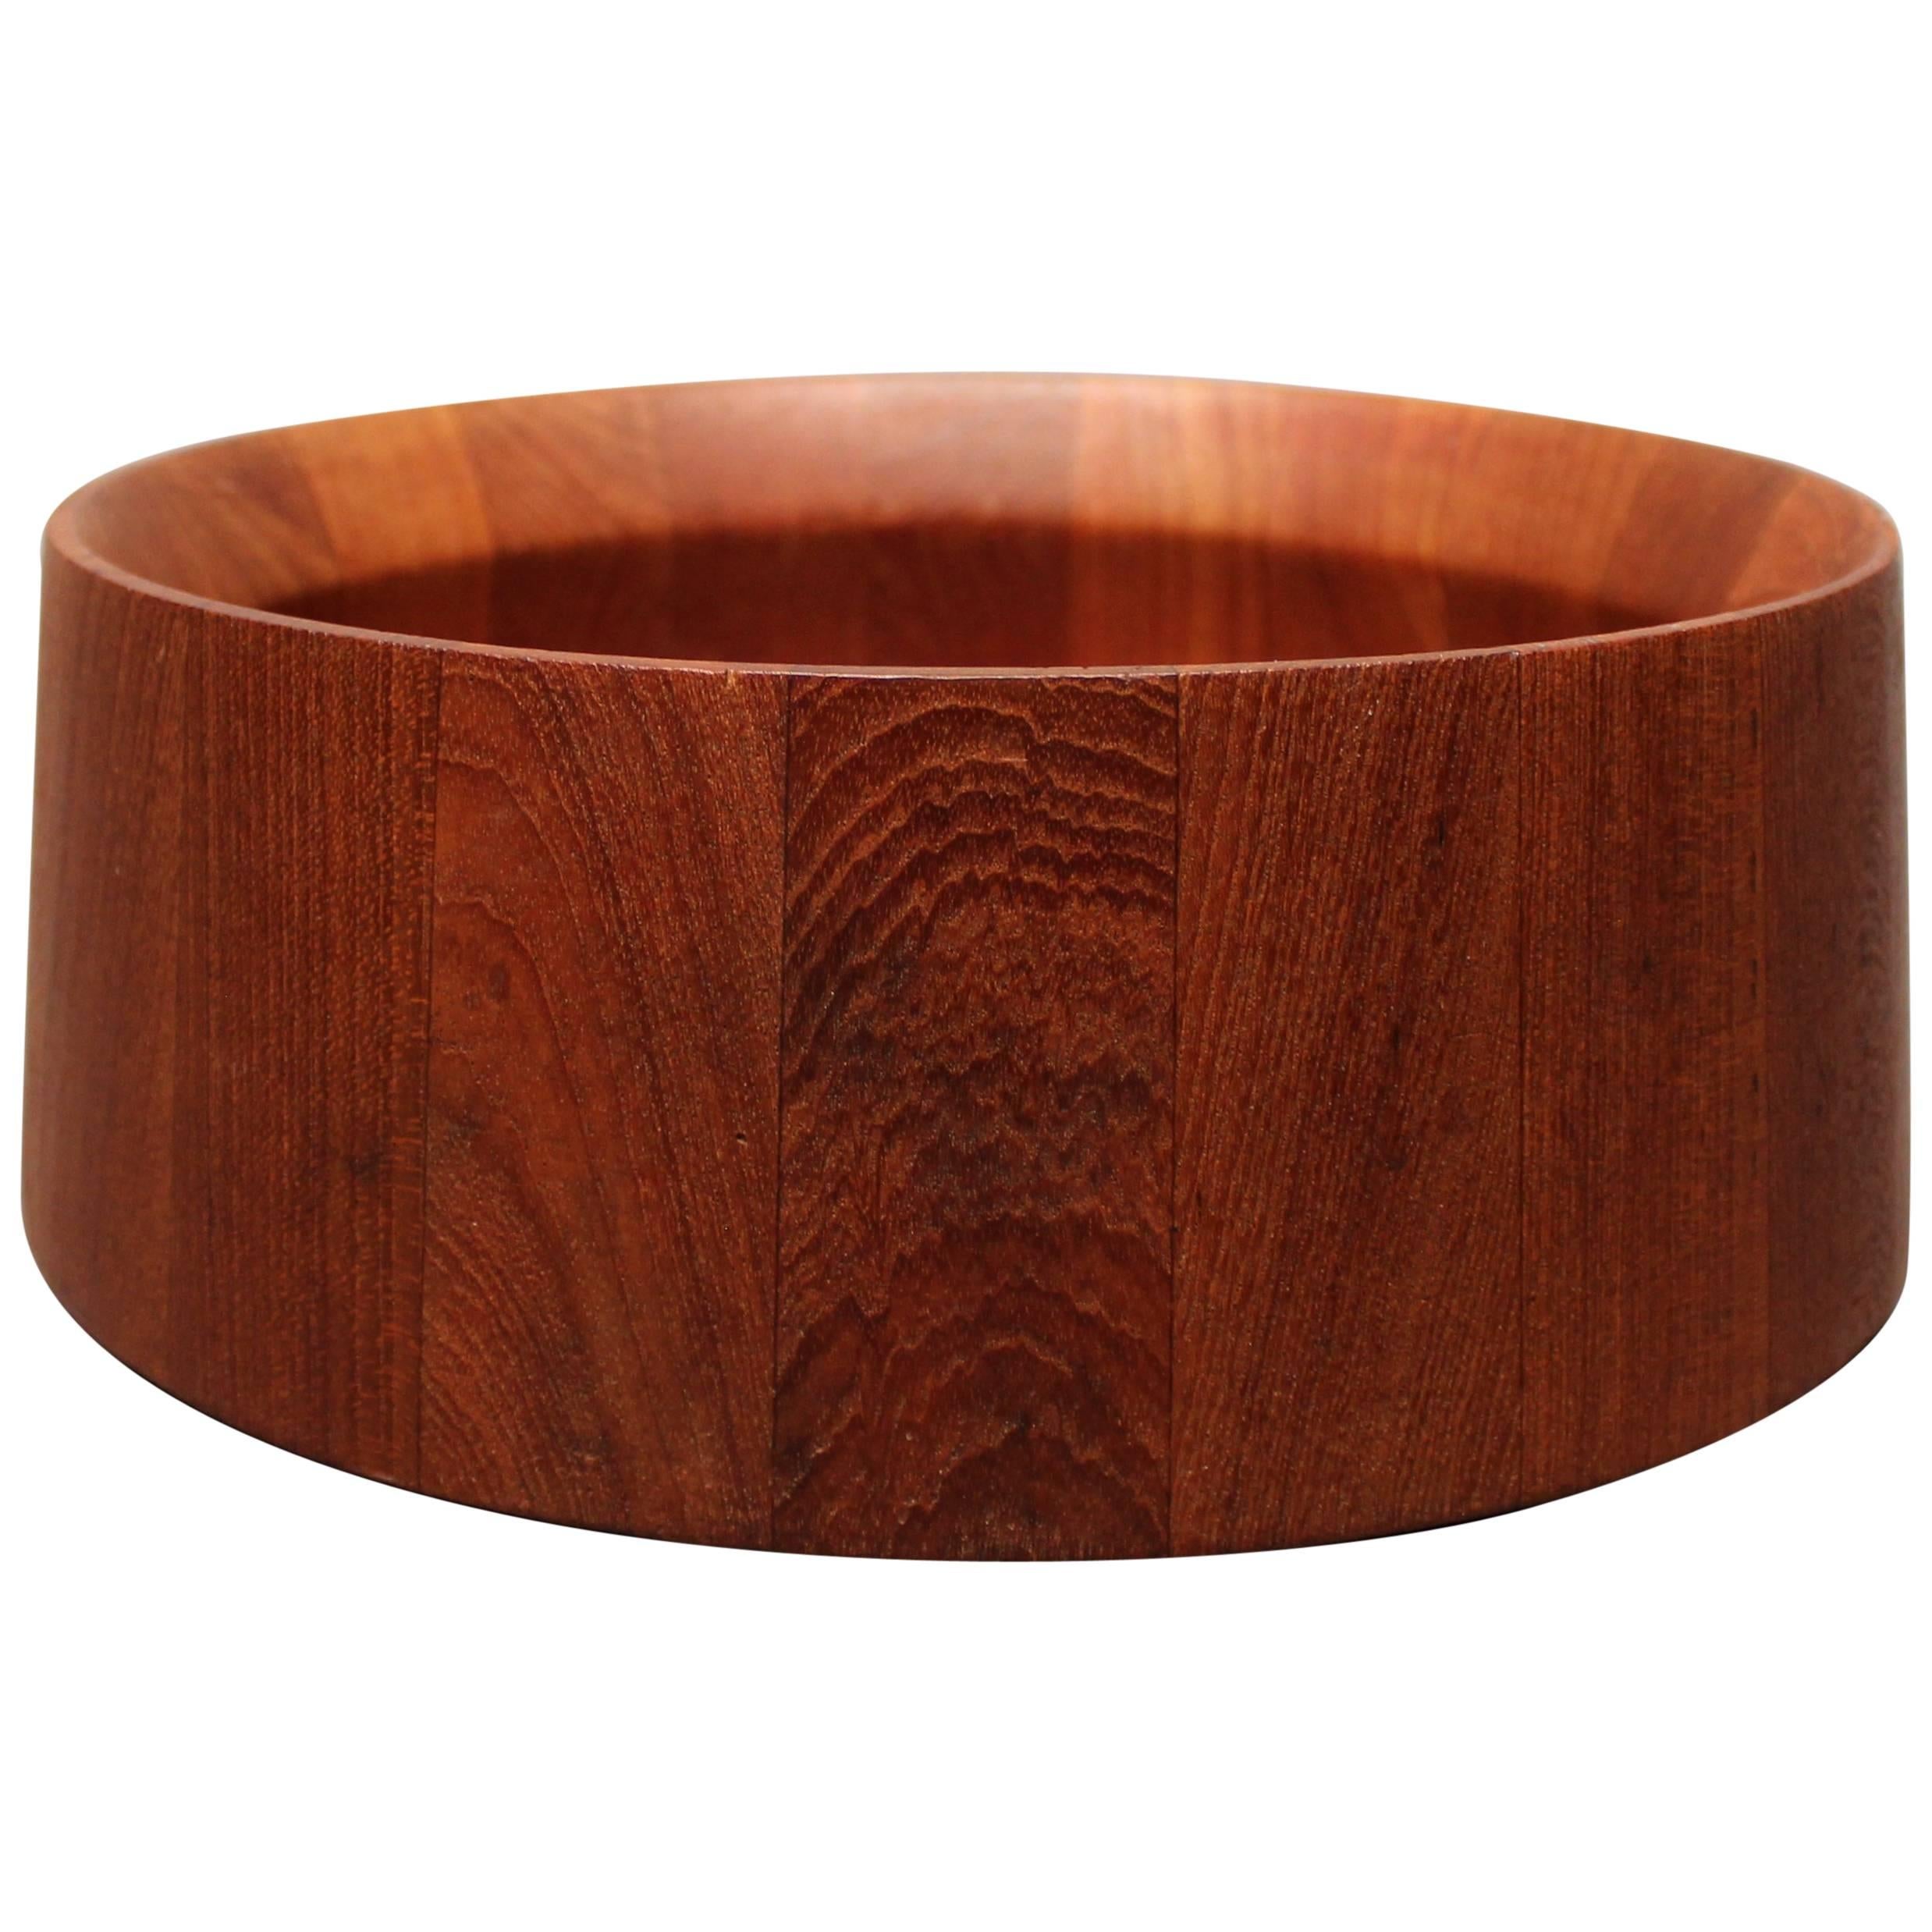 Bowl in Teak by Jens Harald Quistgaard, Danish Design from the 1960s